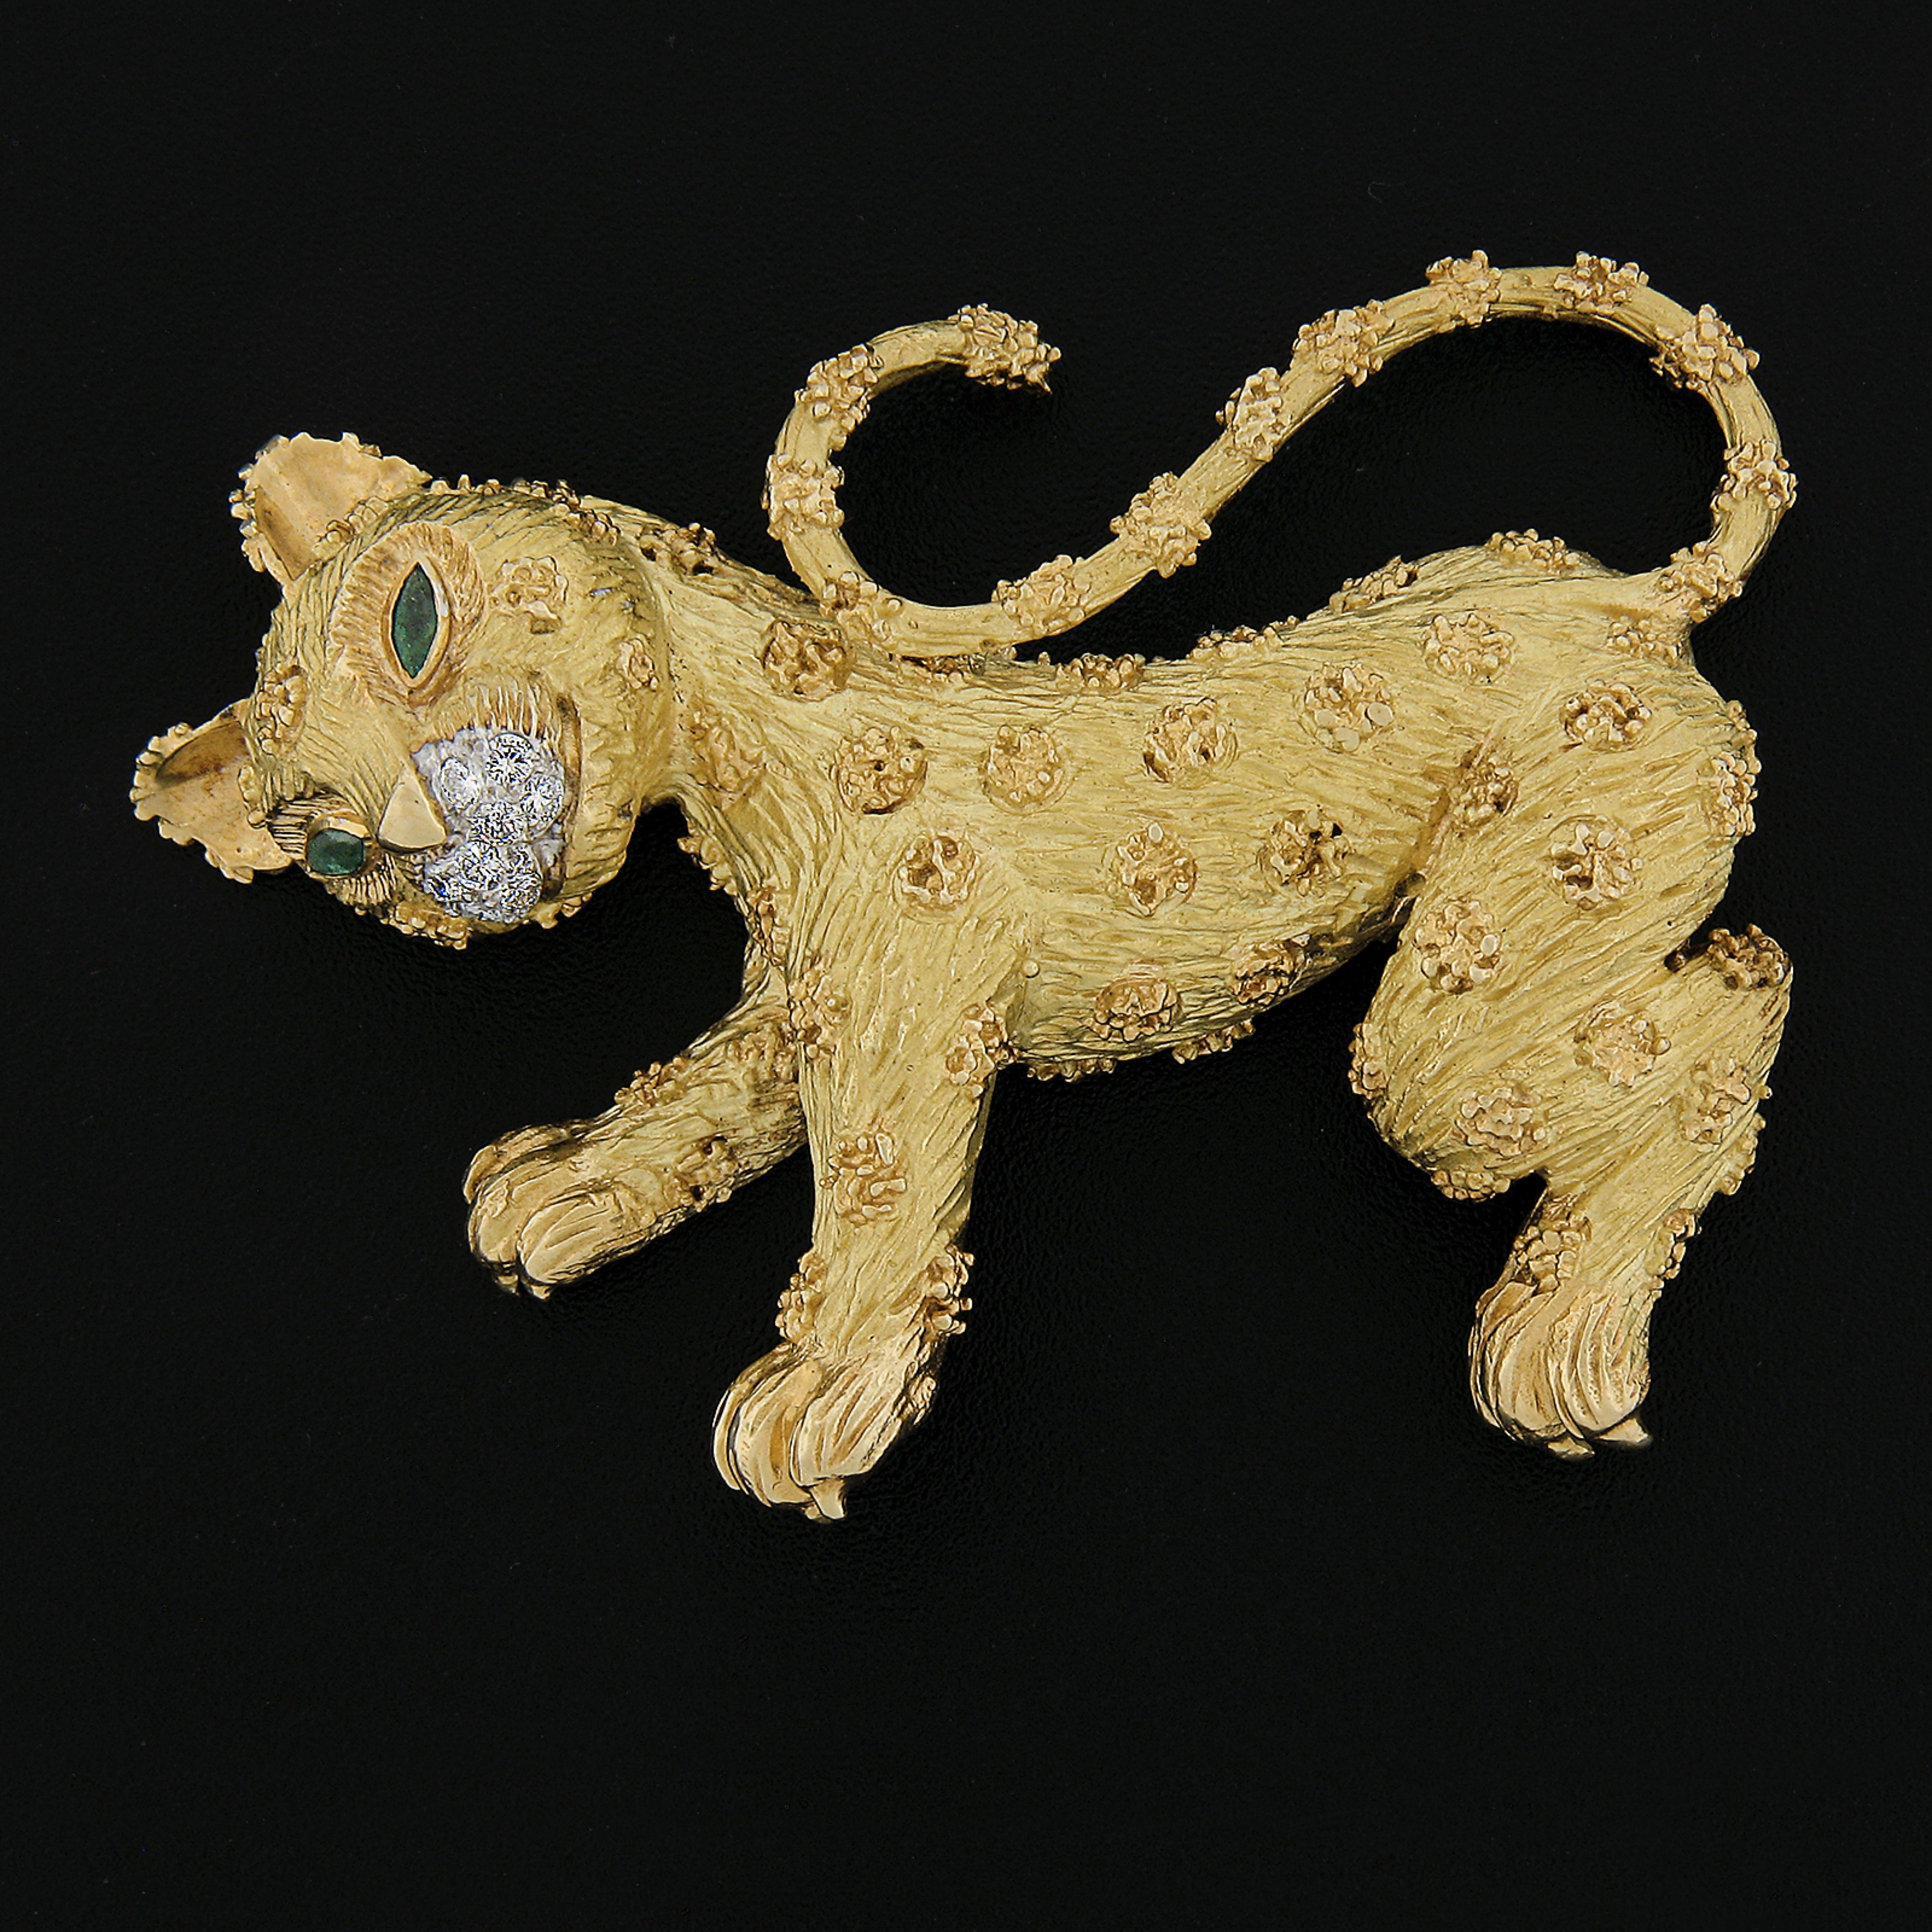 Here we have an Incredible French brooch pin by Robert Wander crafted in solid 18k yellow gold and features leopard cat design. The cat's eyes are set with 2 green emerald marquise cut stones and the nose is covered with fine quality round brilliant